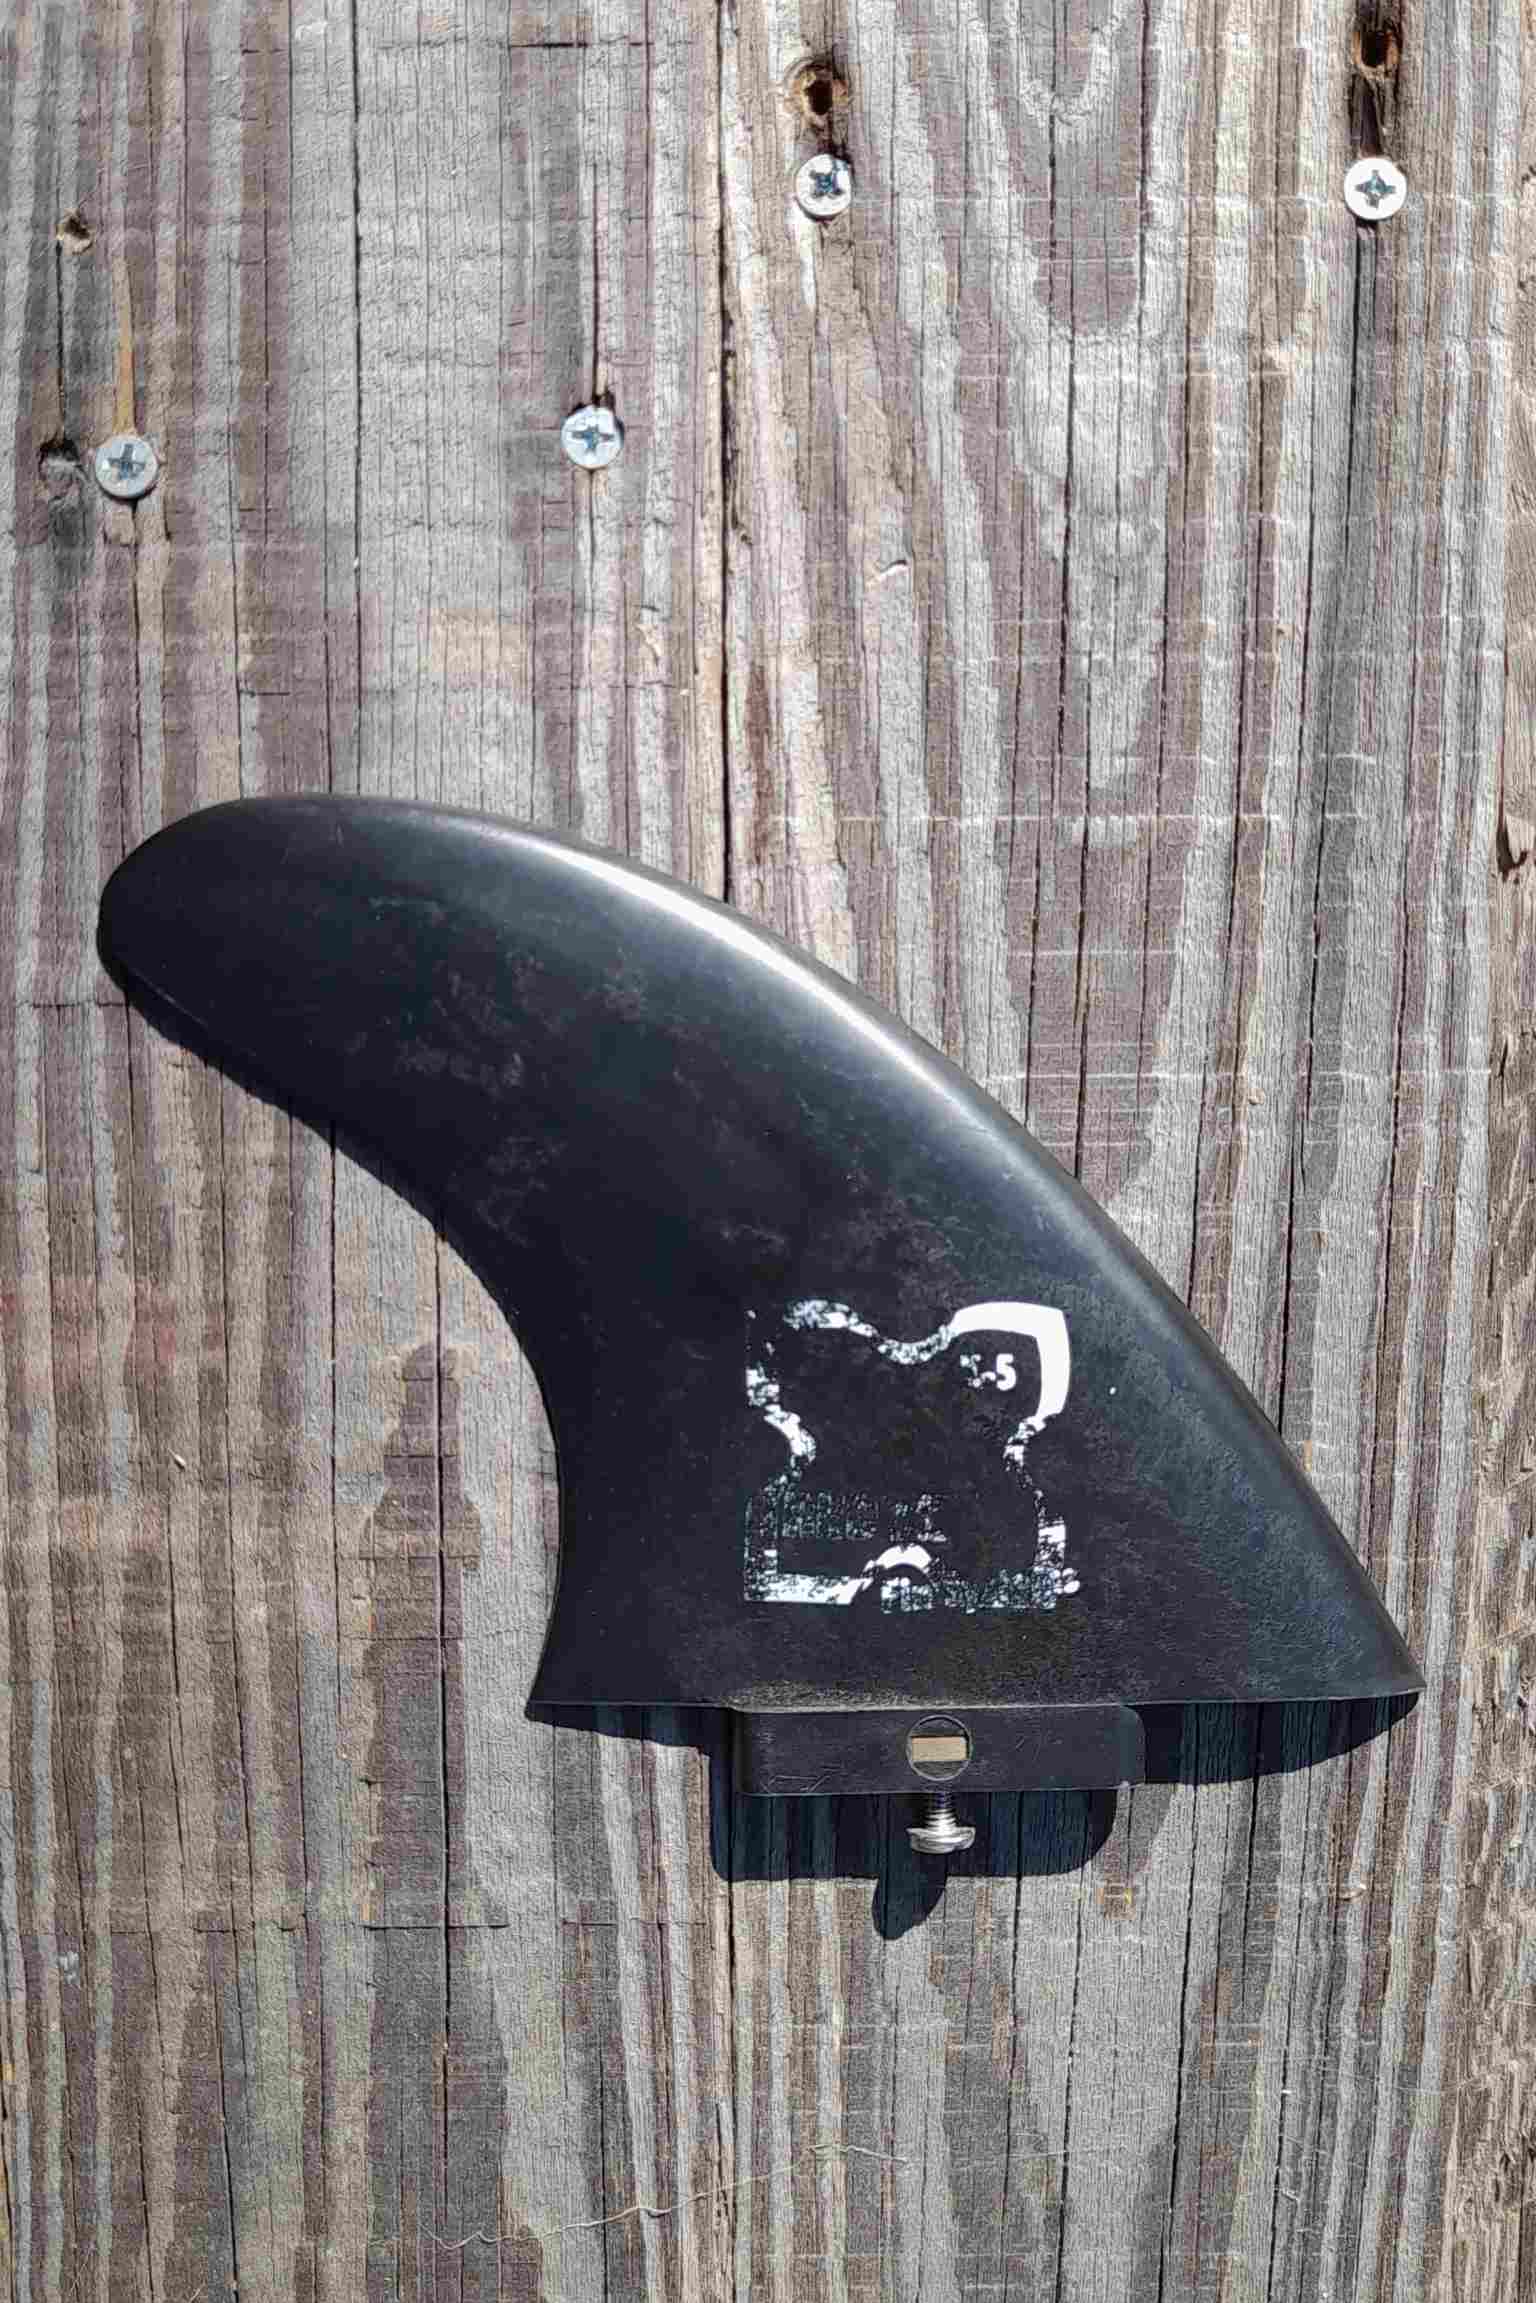 Z Sold – FIN – RED X X5 Thruster Fin – (Right Fin Only)